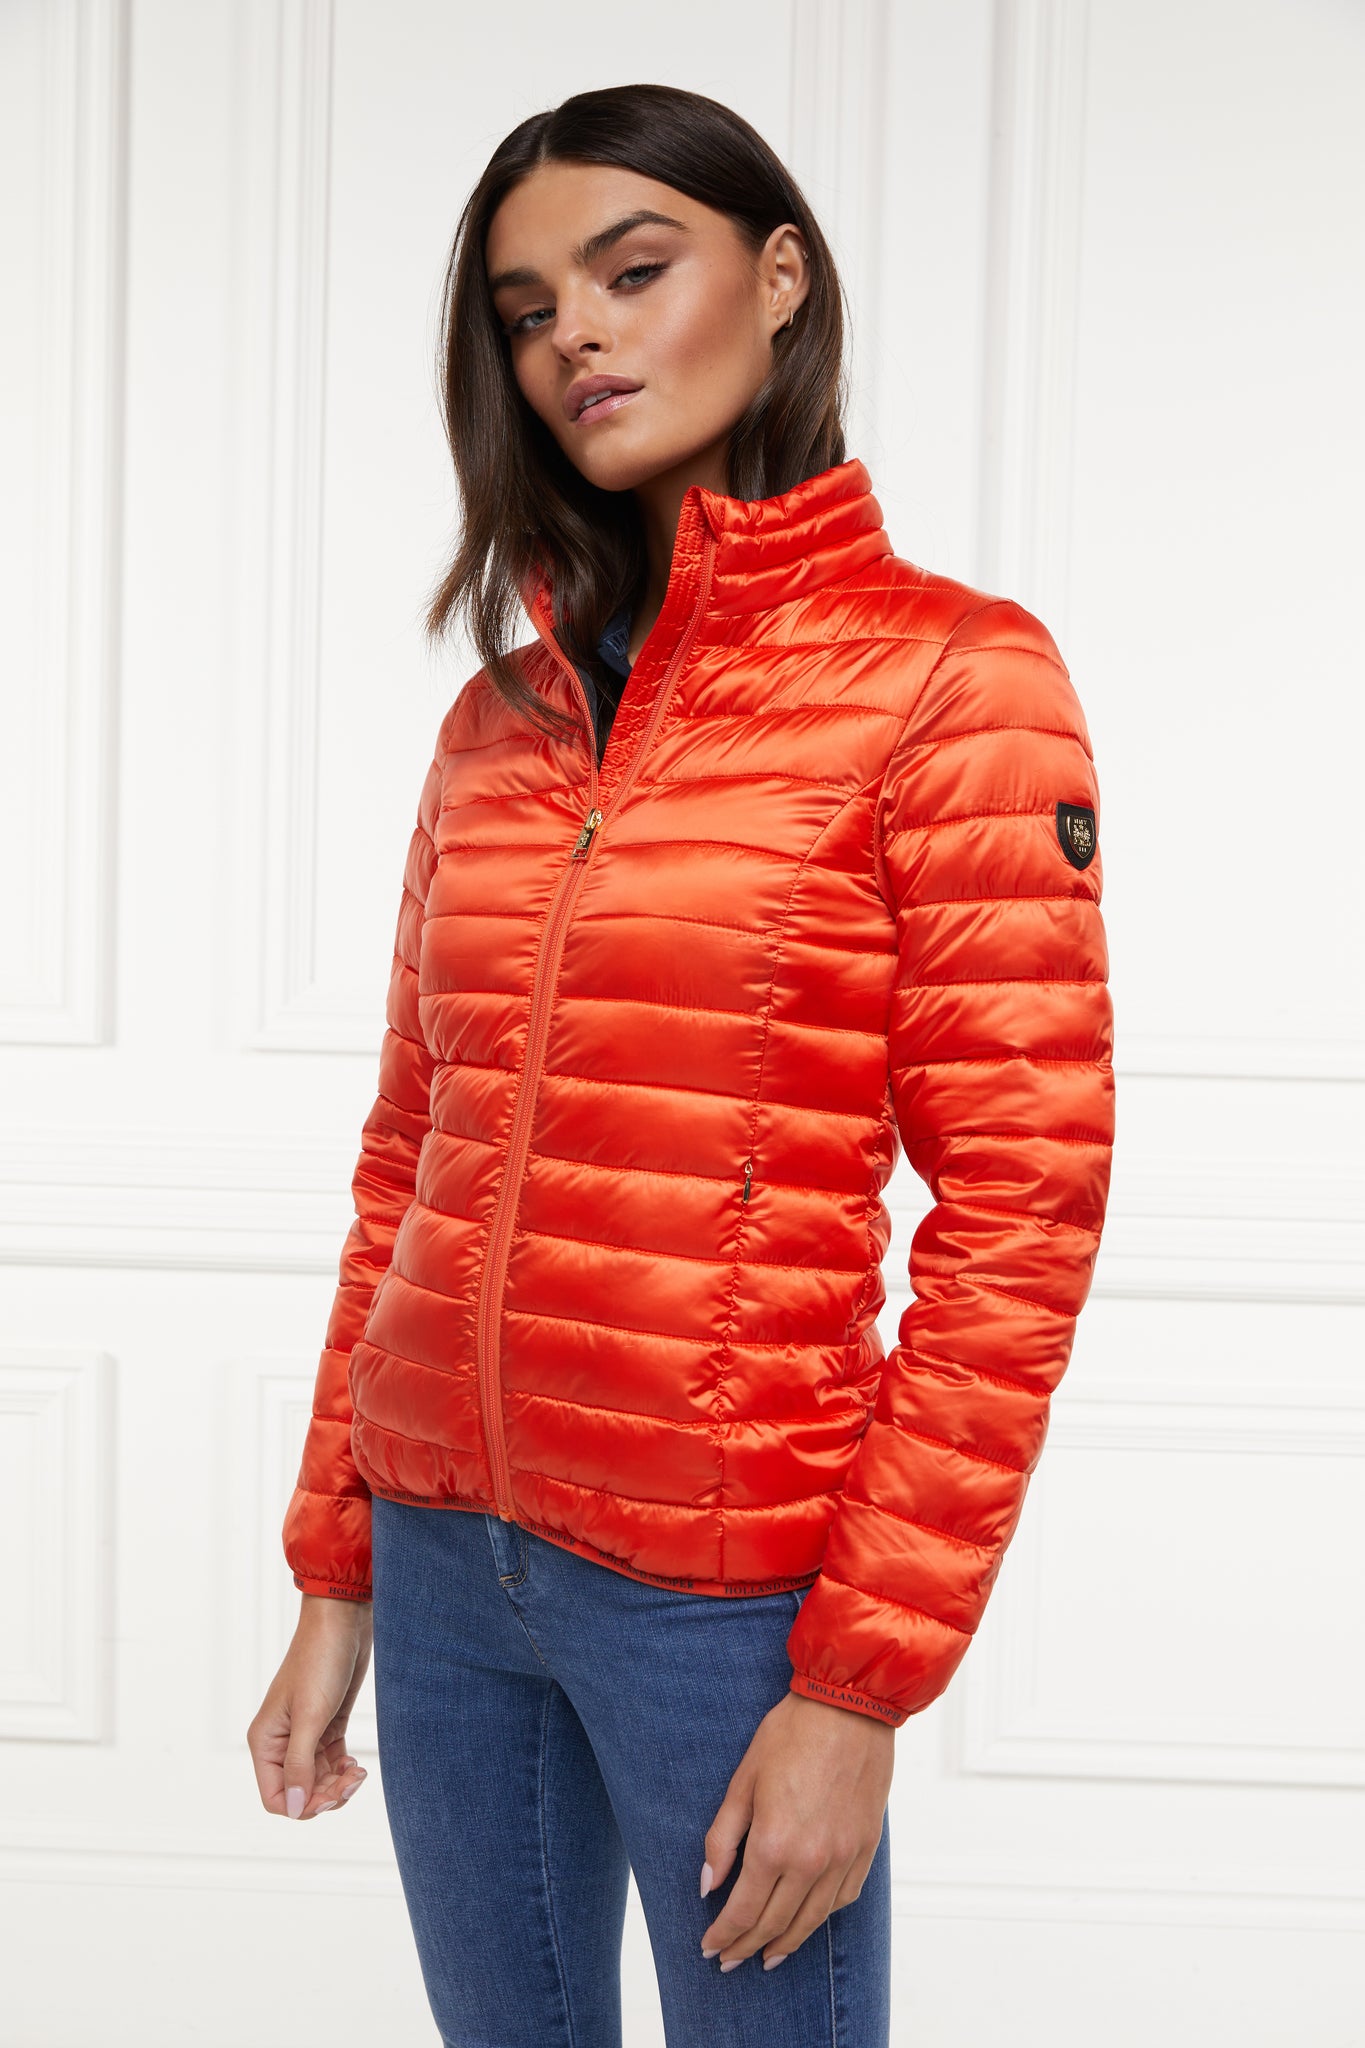 womens lightweight hoodless padded orange jacket with embroidery detail on back high neck and elasticated cuffs and hem. easily packs away into separate small bag of the same colour with handle 